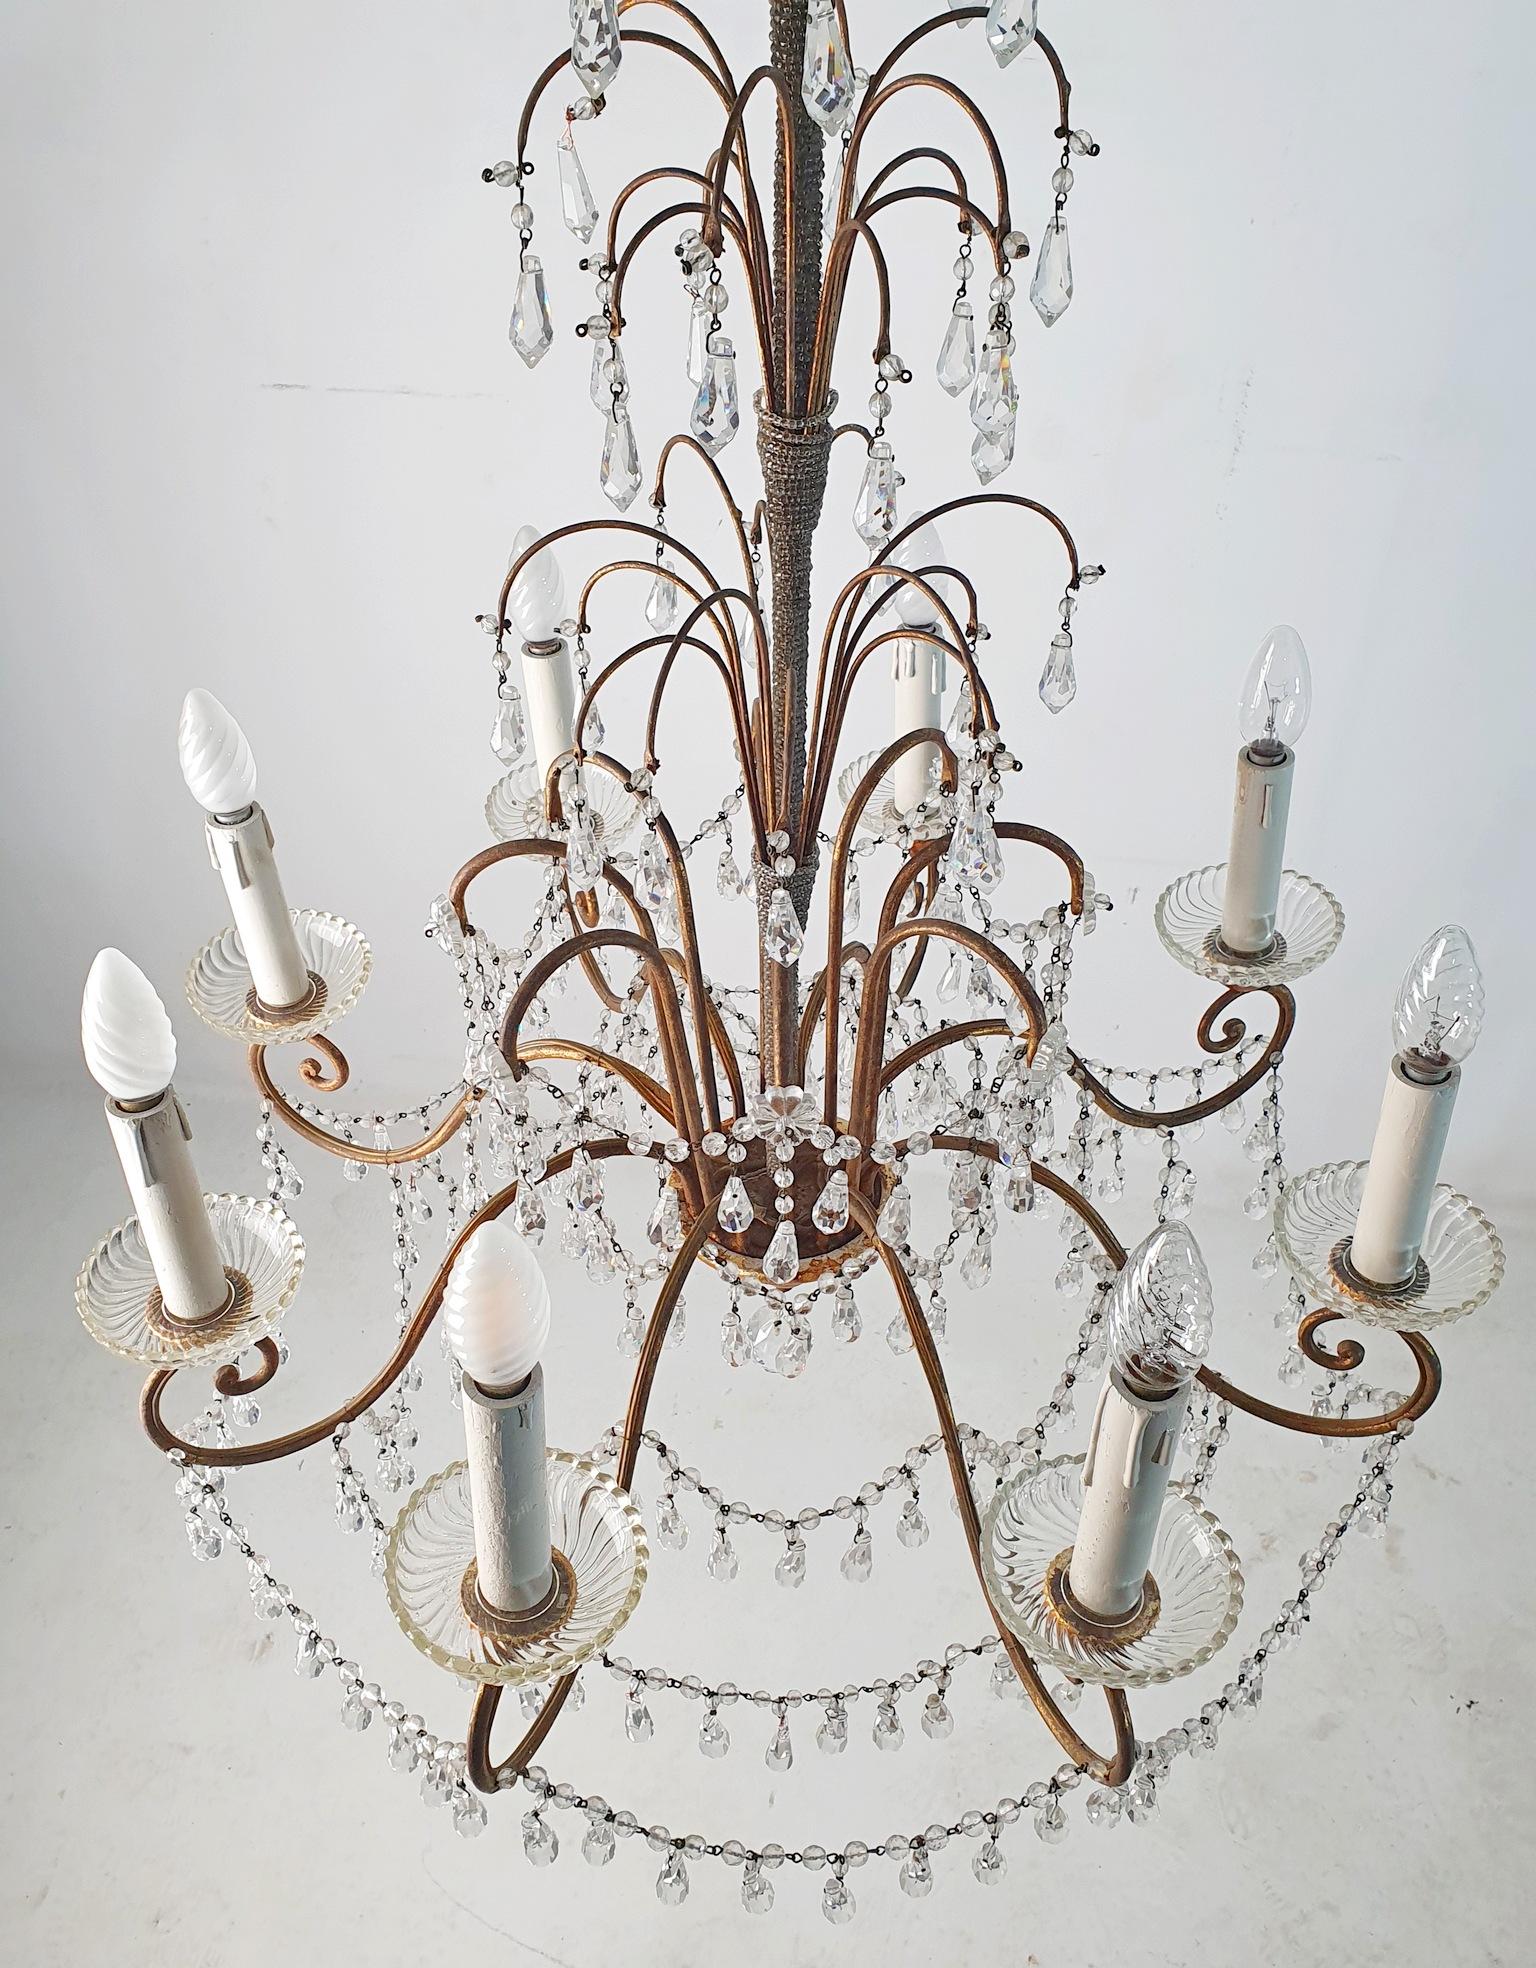 19th Century Genovese Empire Style Chandelier For Sale